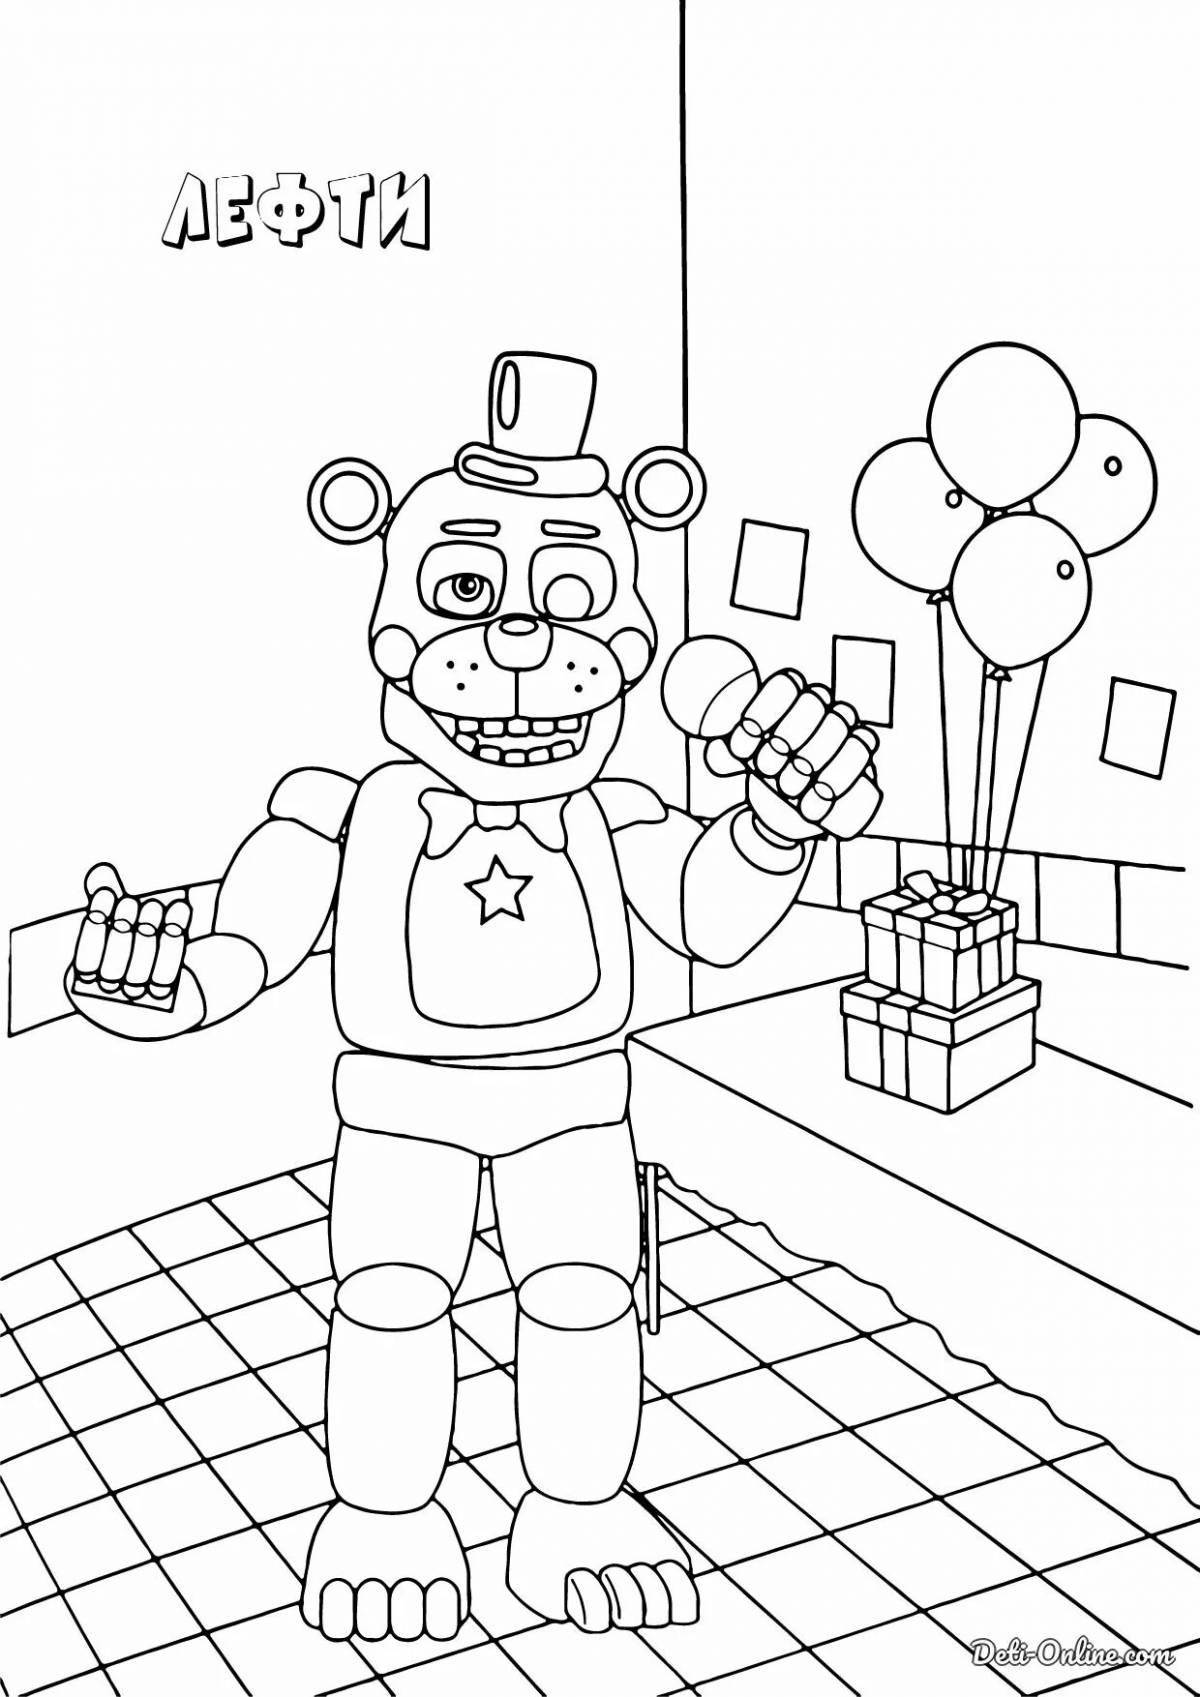 Large left-handed coloring page